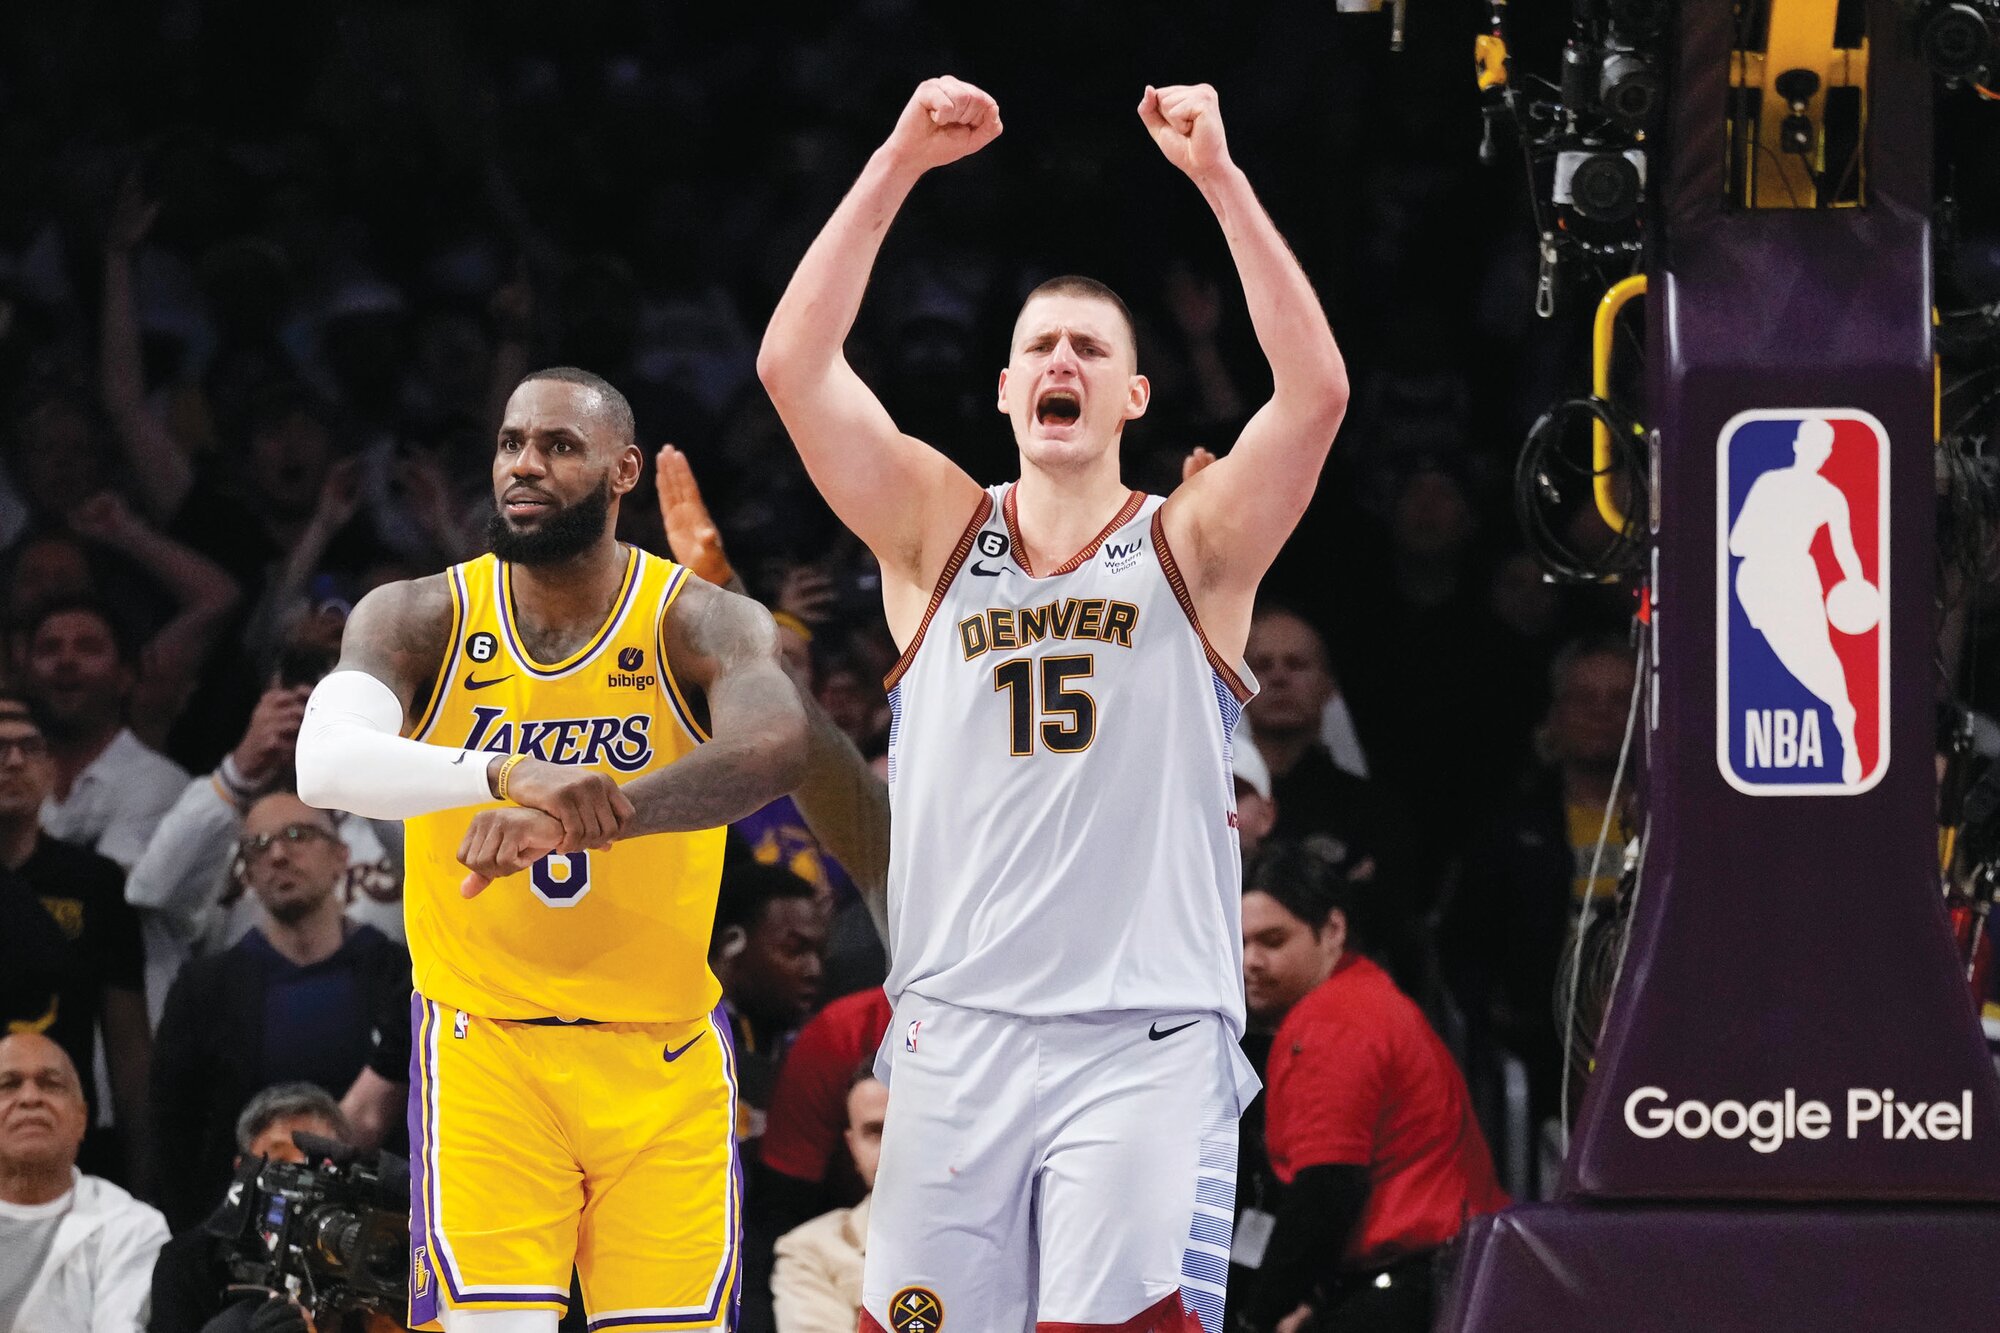 Denver Nuggets center Nikola Jokic (15) celebrates after beating the Los Angeles Lakers in Game 4 of the Western Conference Finals on Monday in Los Angeles.